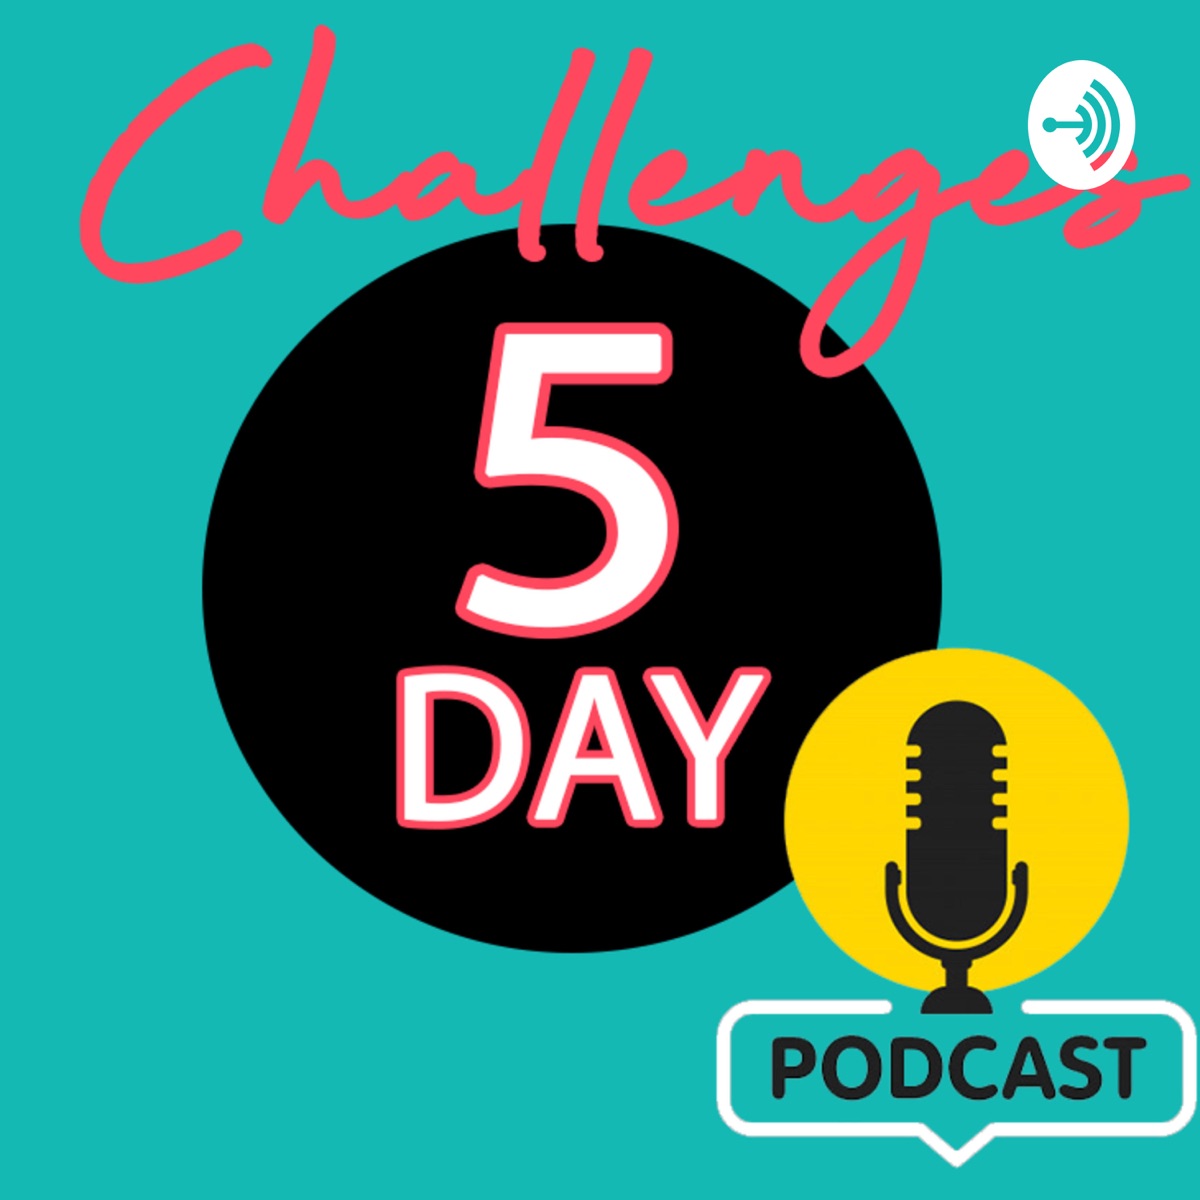 5 Day Challenge – Podcast – Podtail